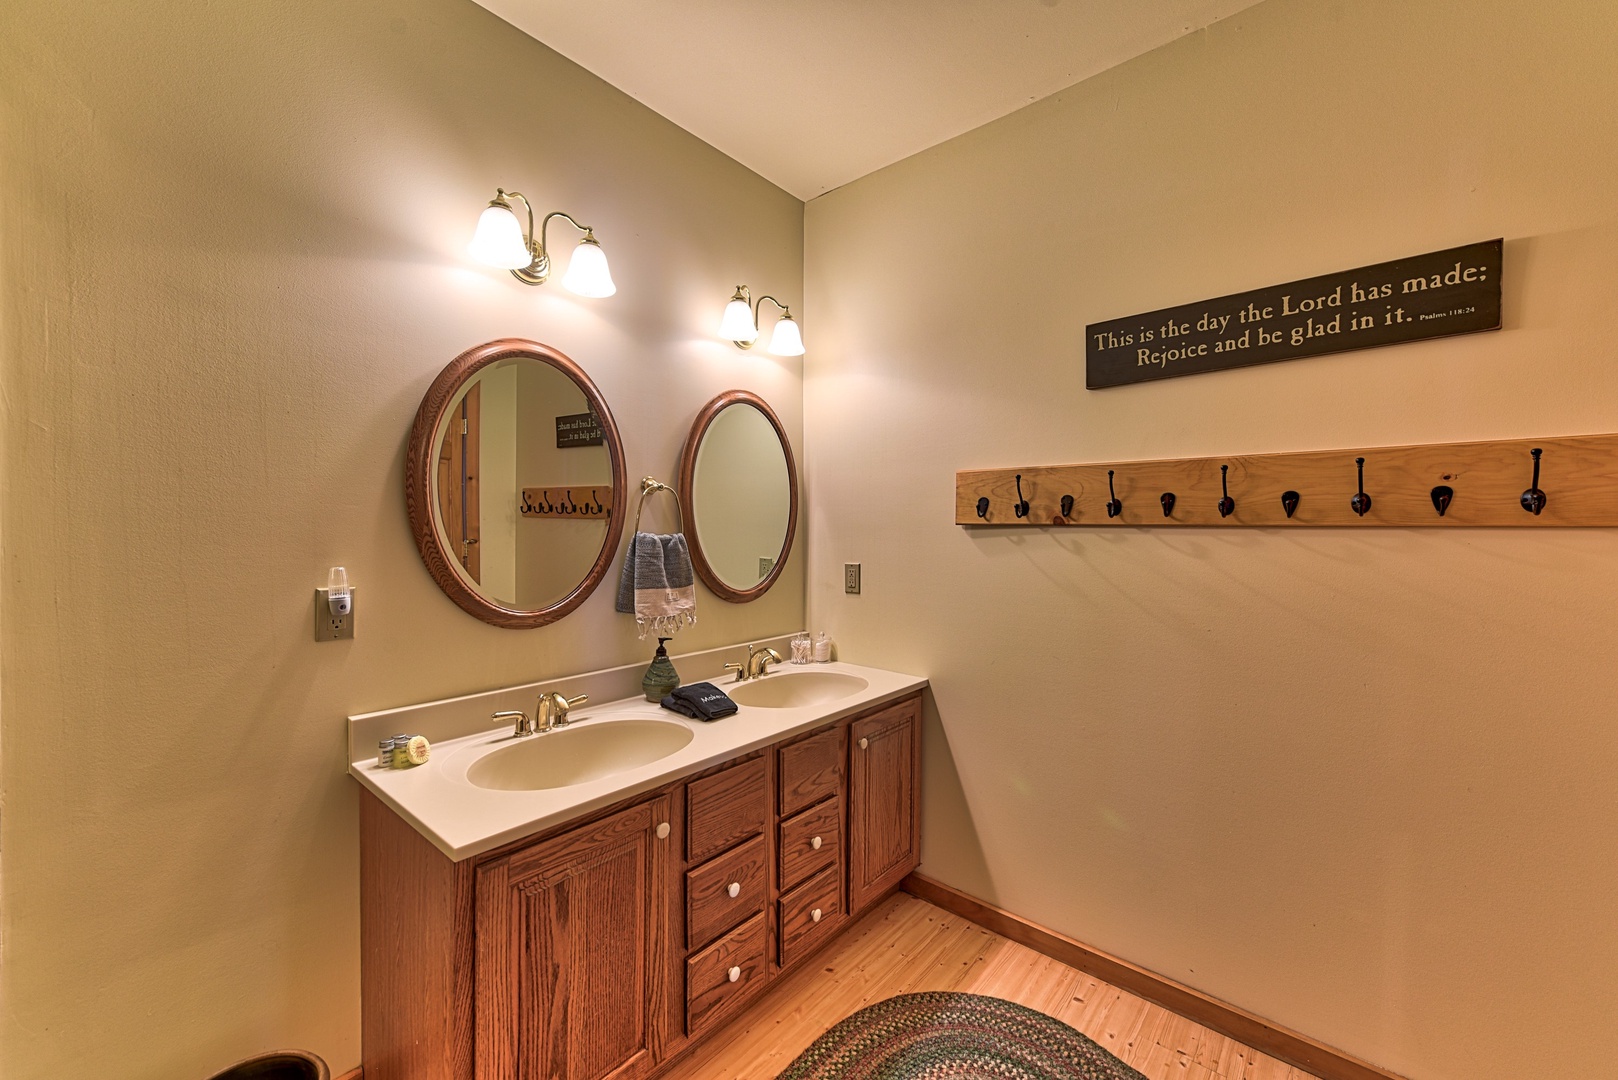 Large groups can enjoy the convenience of having extra bathrooms.